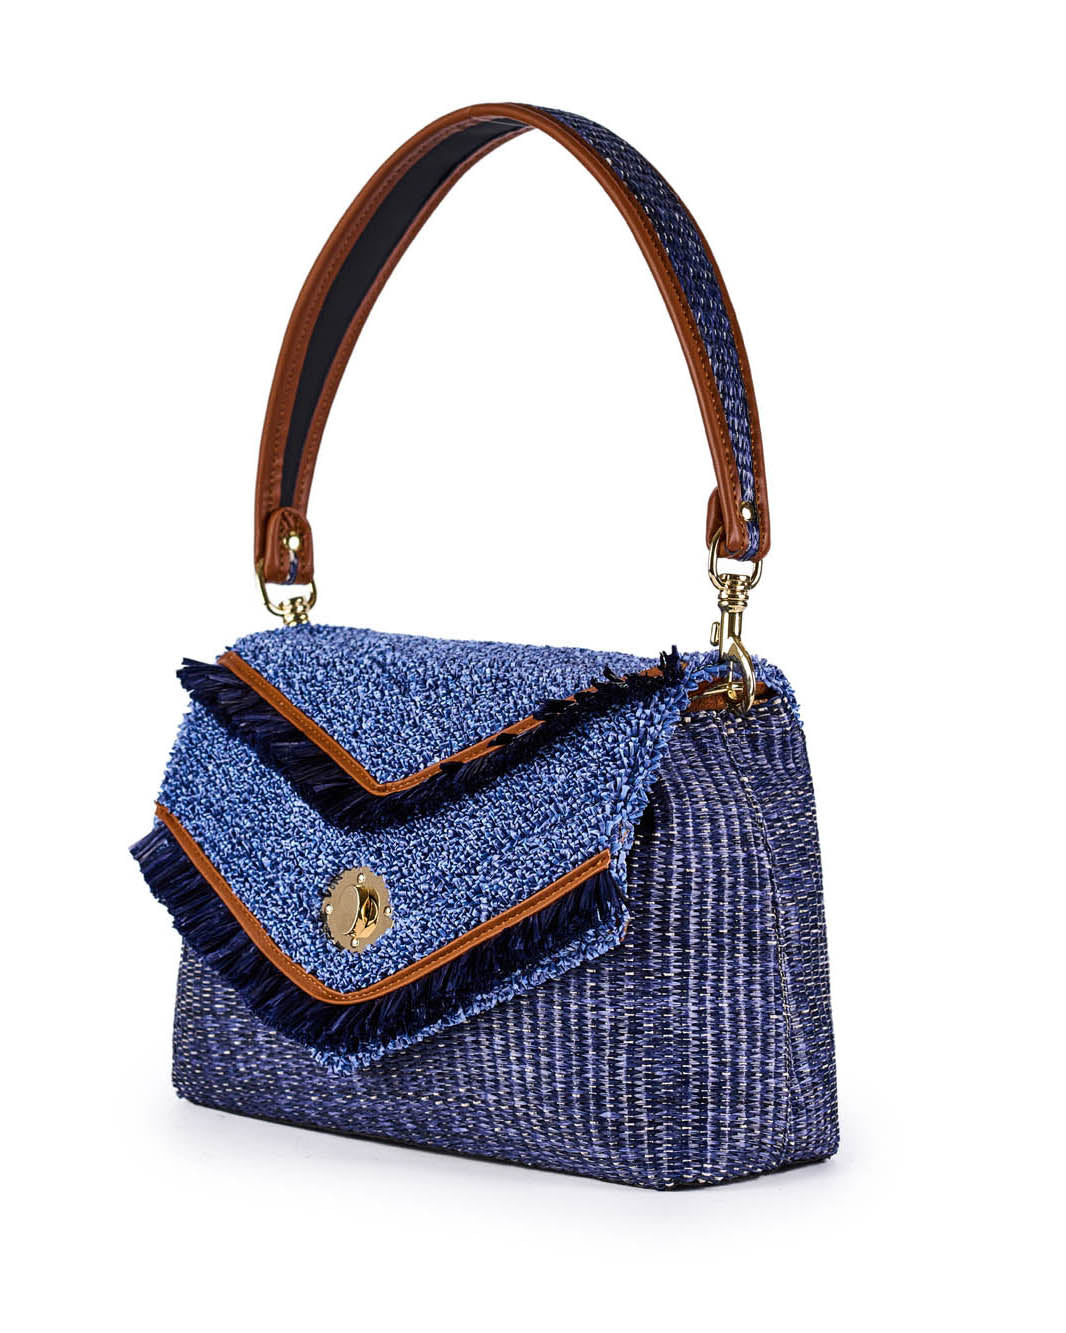 Stylish blue tweed handbag with brown leather strap and gold clasp